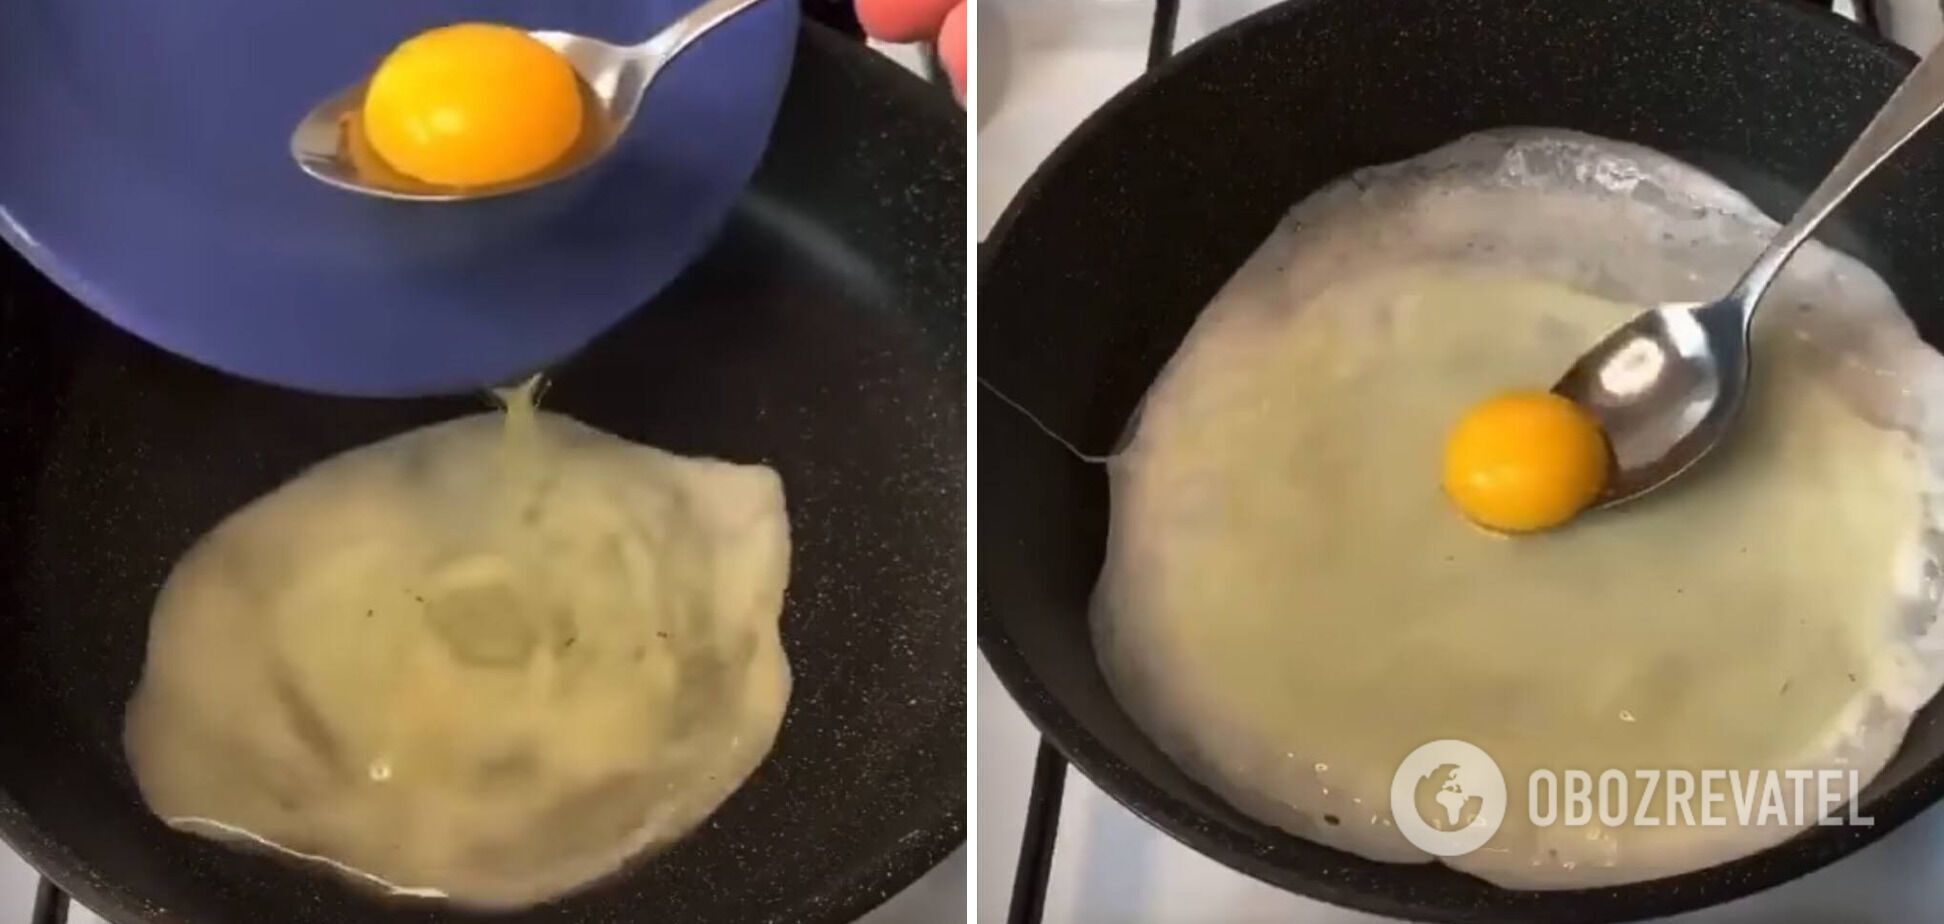 Cooking a poached egg